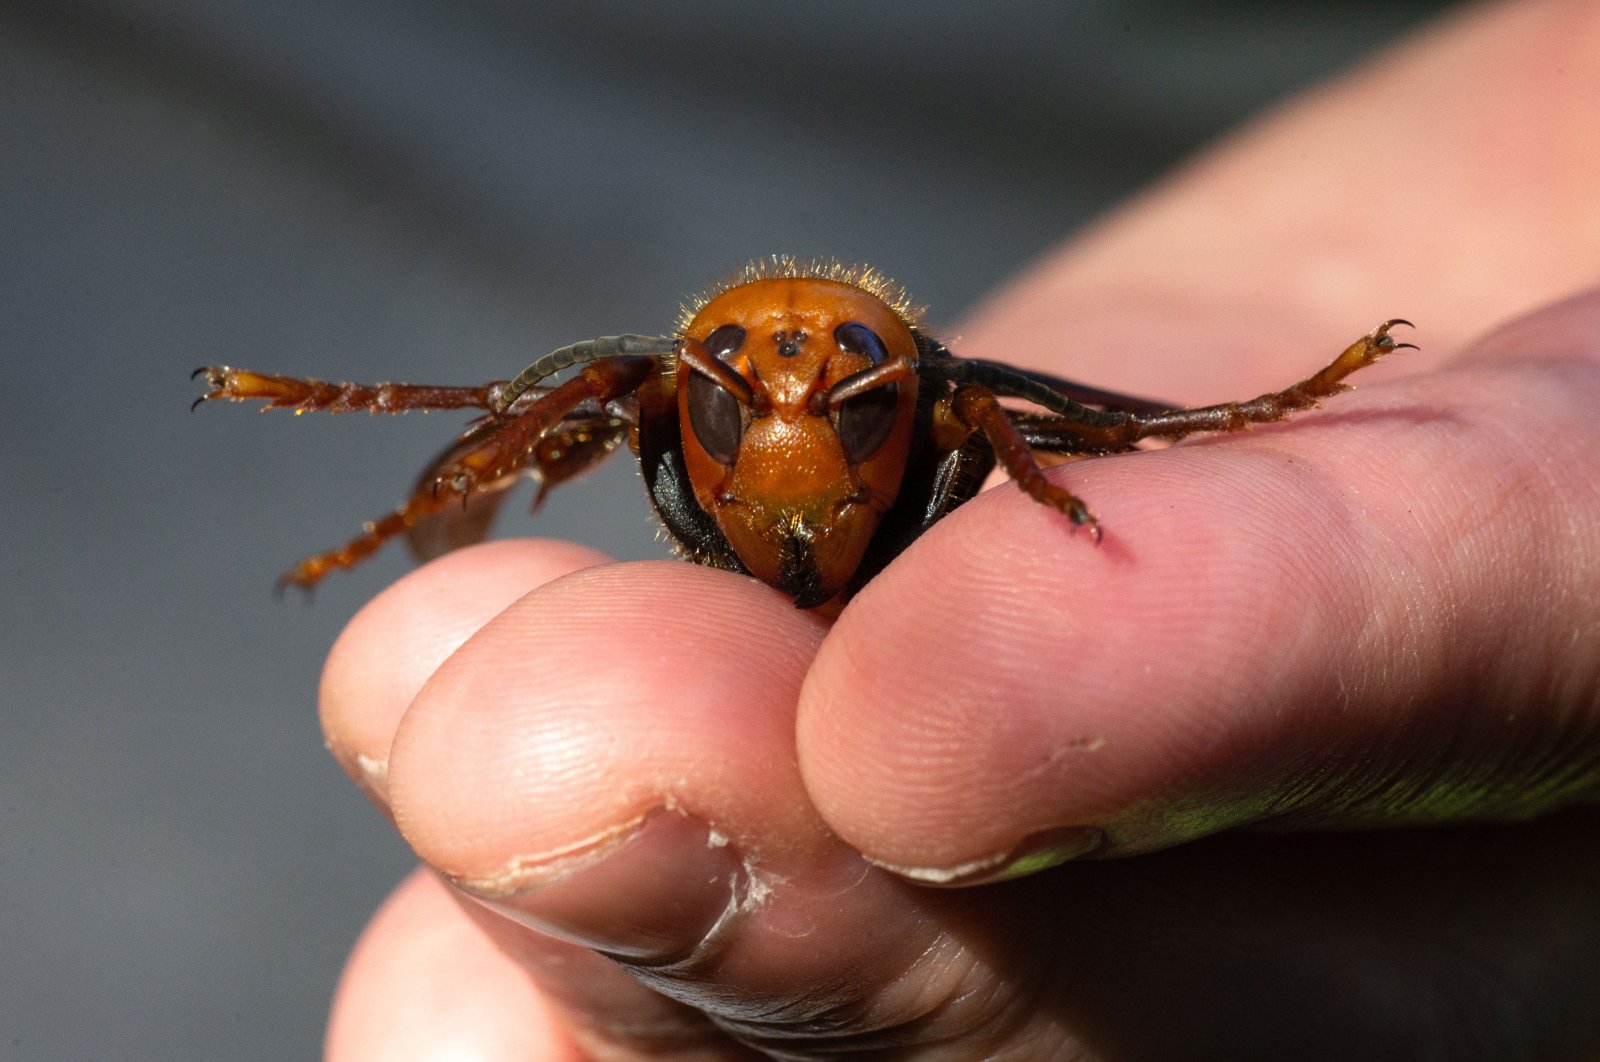 A sample specimen of a dead Asian giant hornet from Japan, also known as a murder hornet, is shown by a pest biologist from the Washington State Department of Agriculture in Bellingham, Washington, July 29, 2020. (AFP Photo)